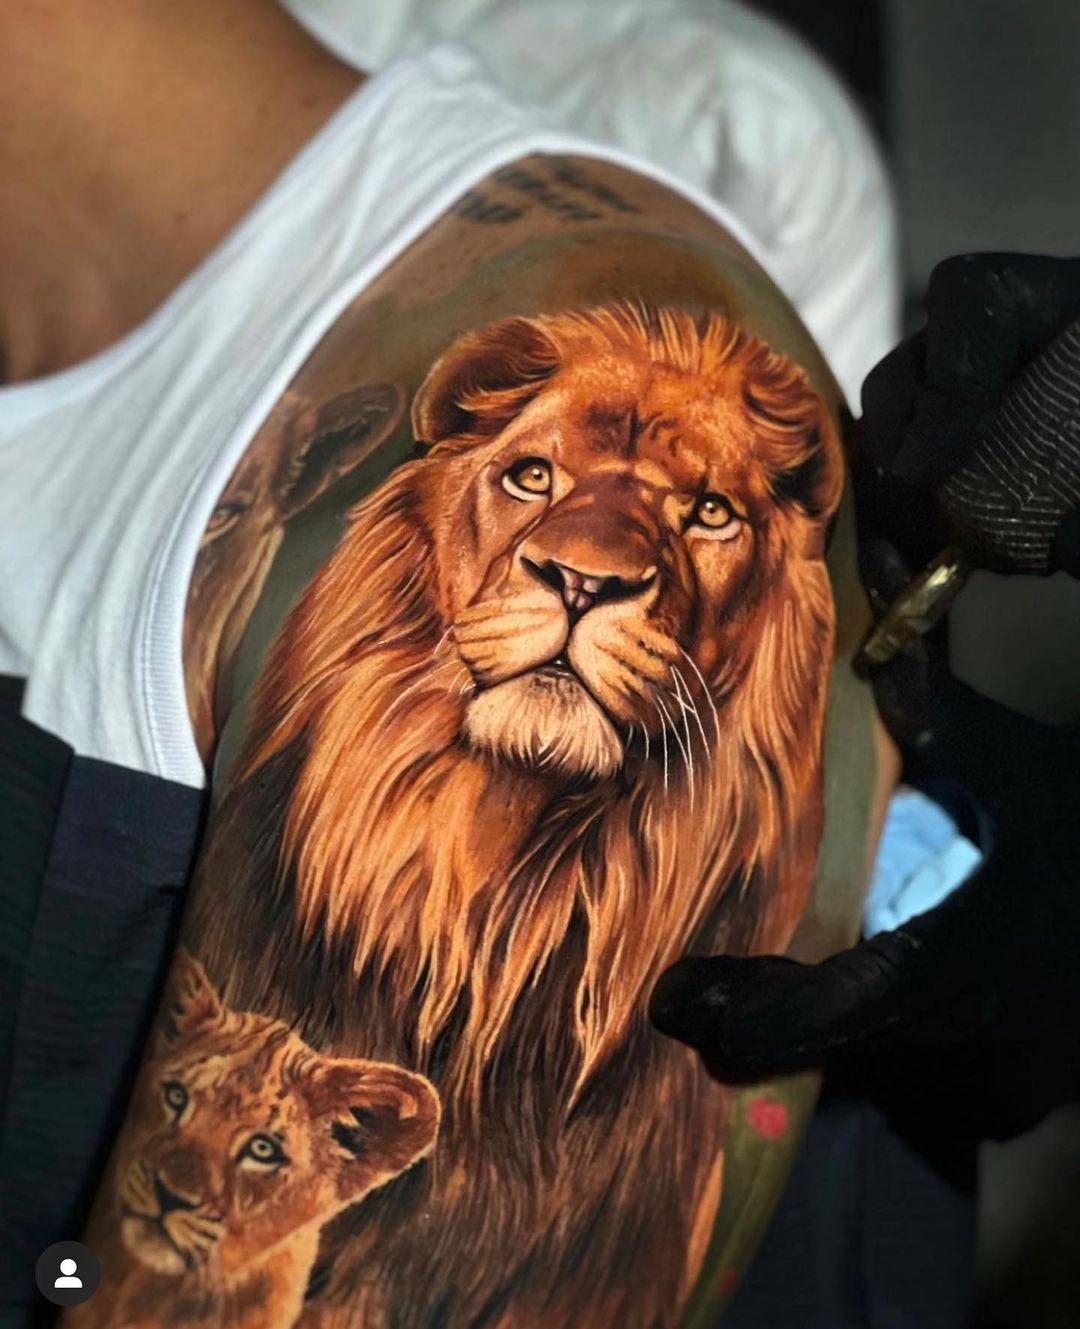 King Lion iPhone Wallpaper | Lion head tattoos, Lion pictures, Lion tattoo